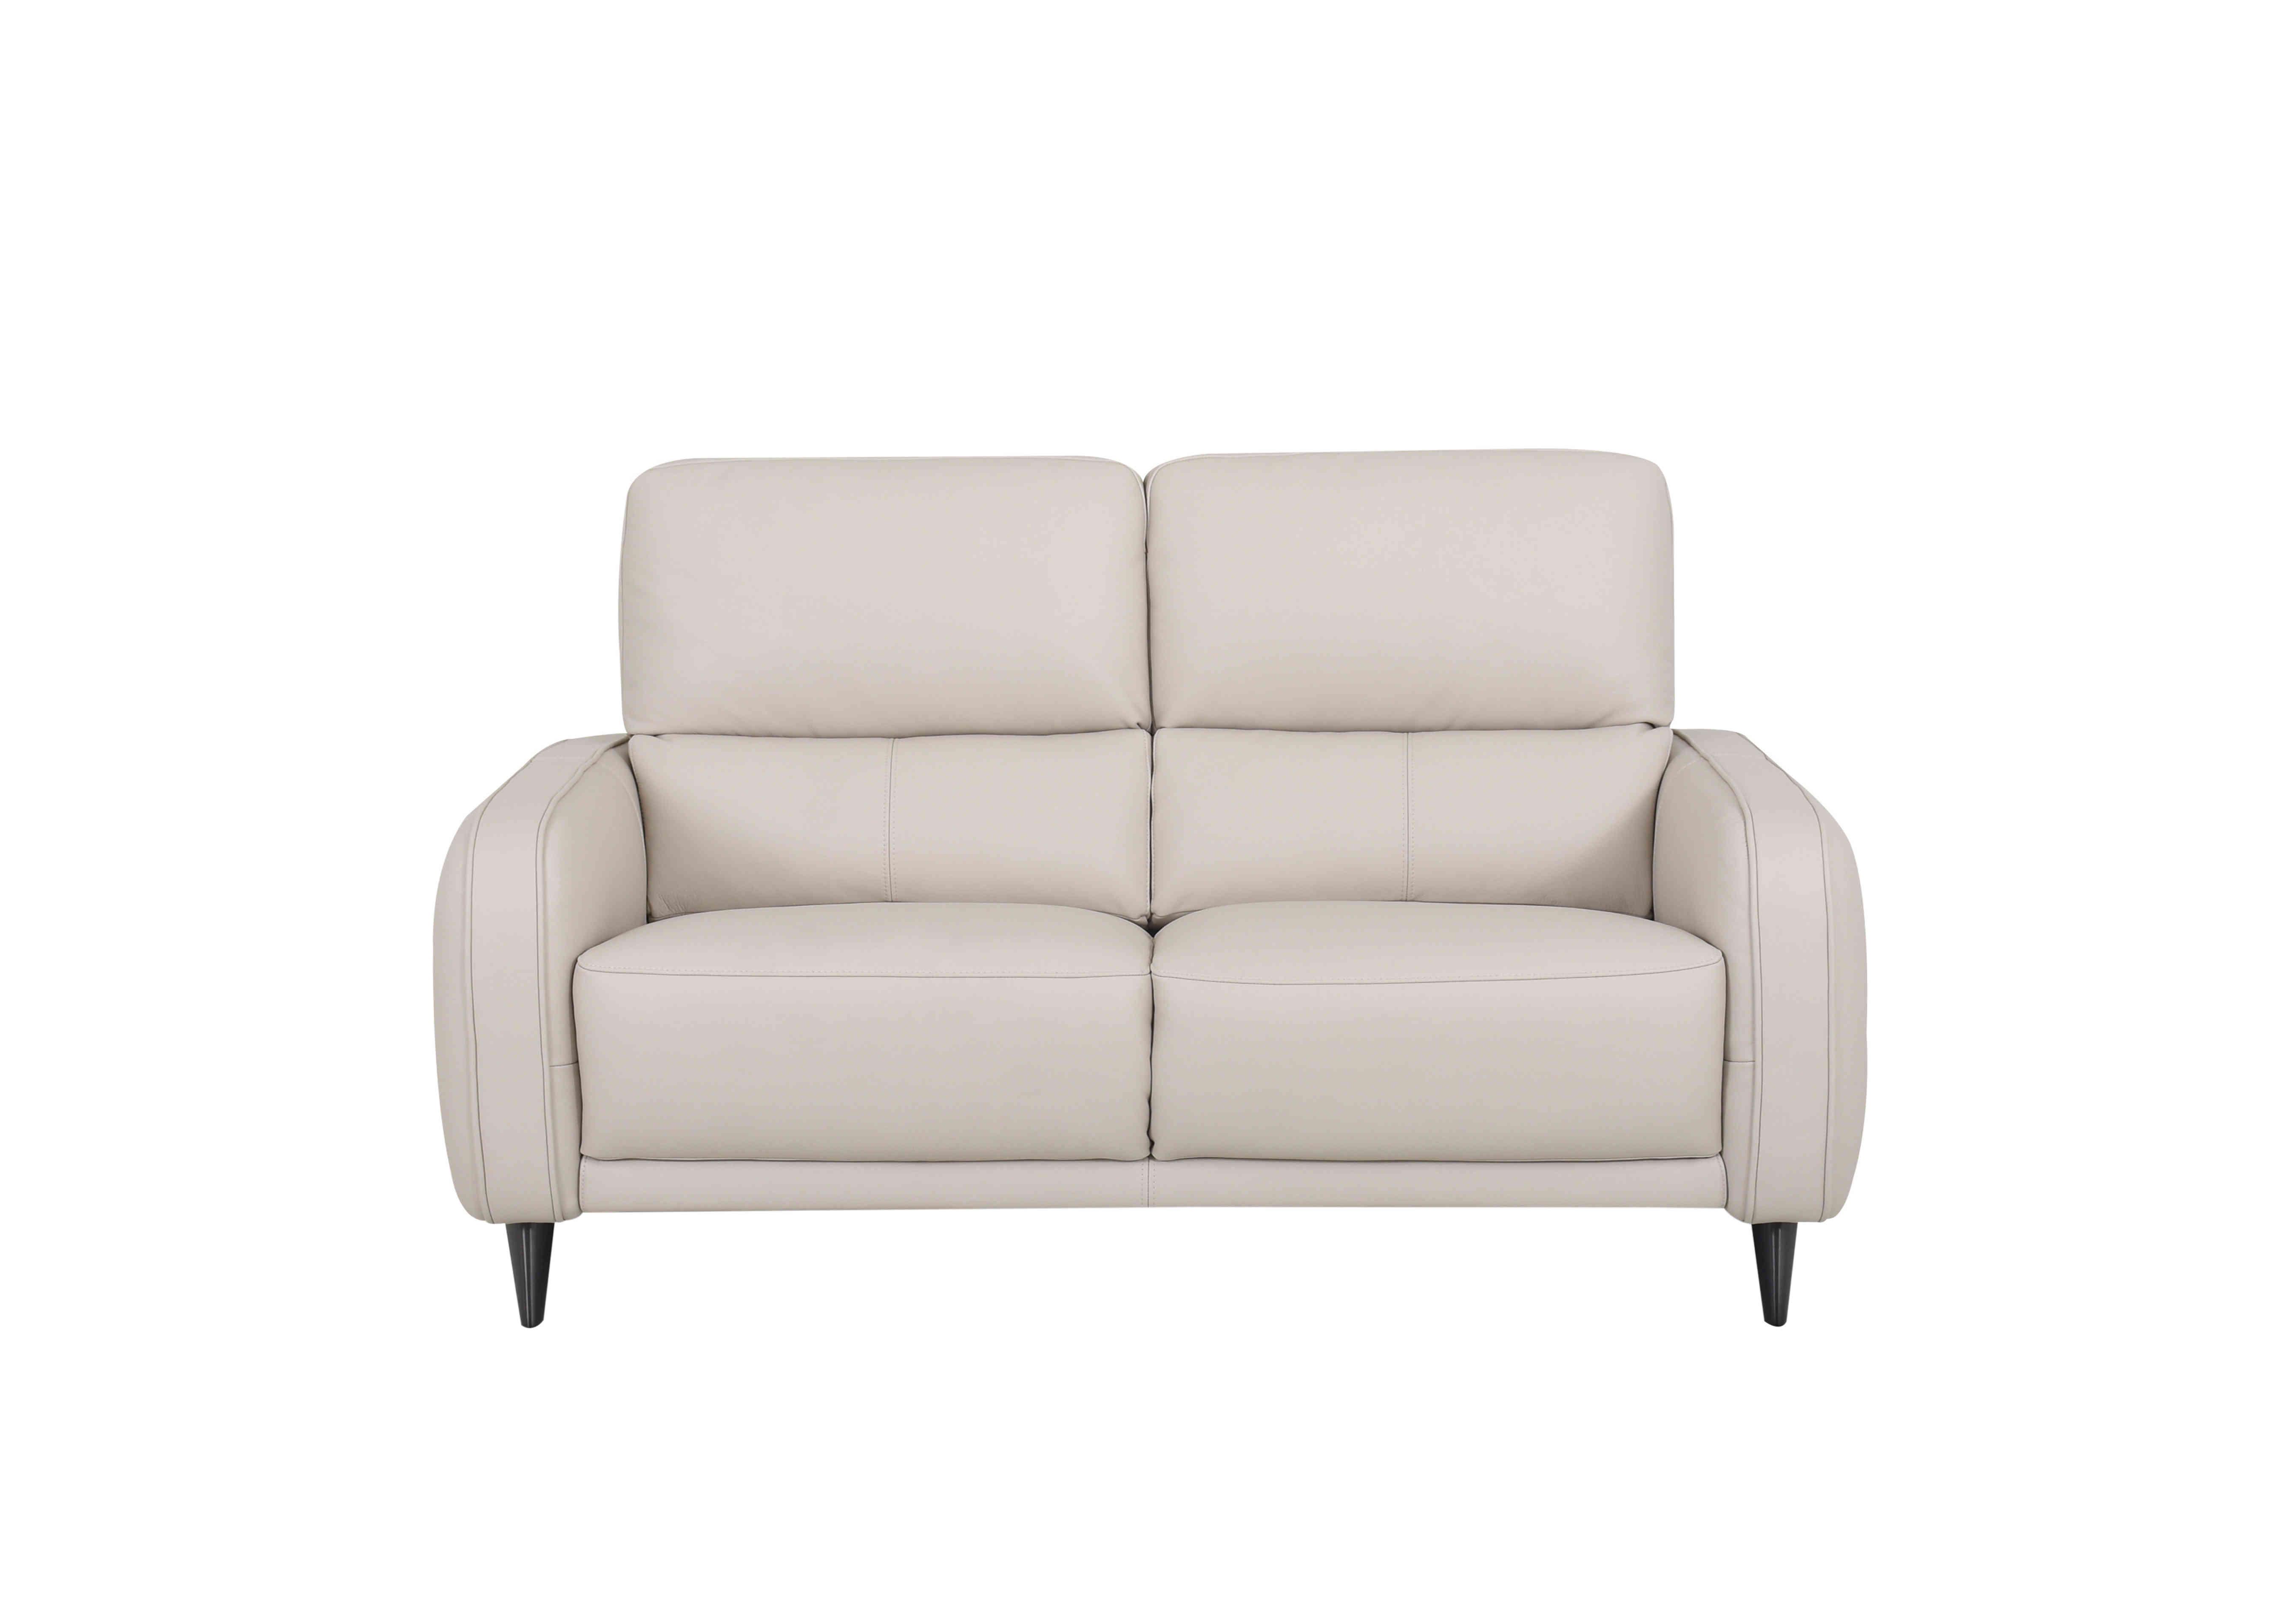 Logan 2.5 Seater Leather Sofa in Nn-521e Frost on Furniture Village